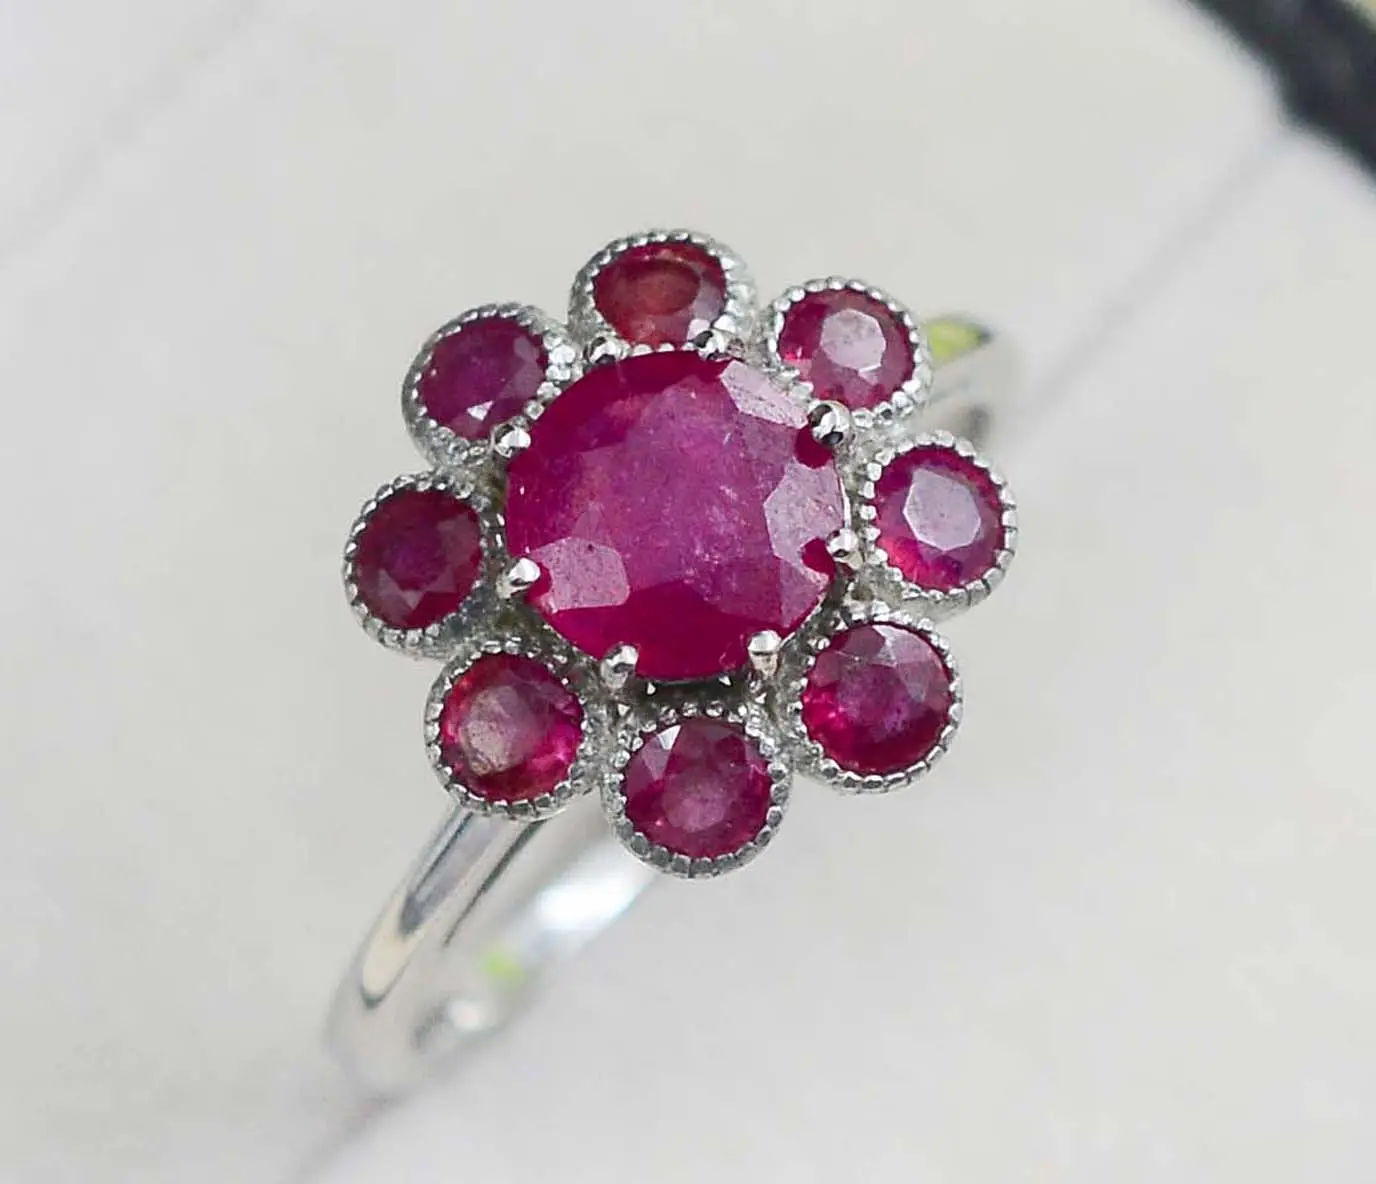 New Arrival Natural Red Ruby 7 MM 3 MM Round Cut Gemstone 925 Sterling Silver For Women Ring Wedding Jewelry Exporter From India